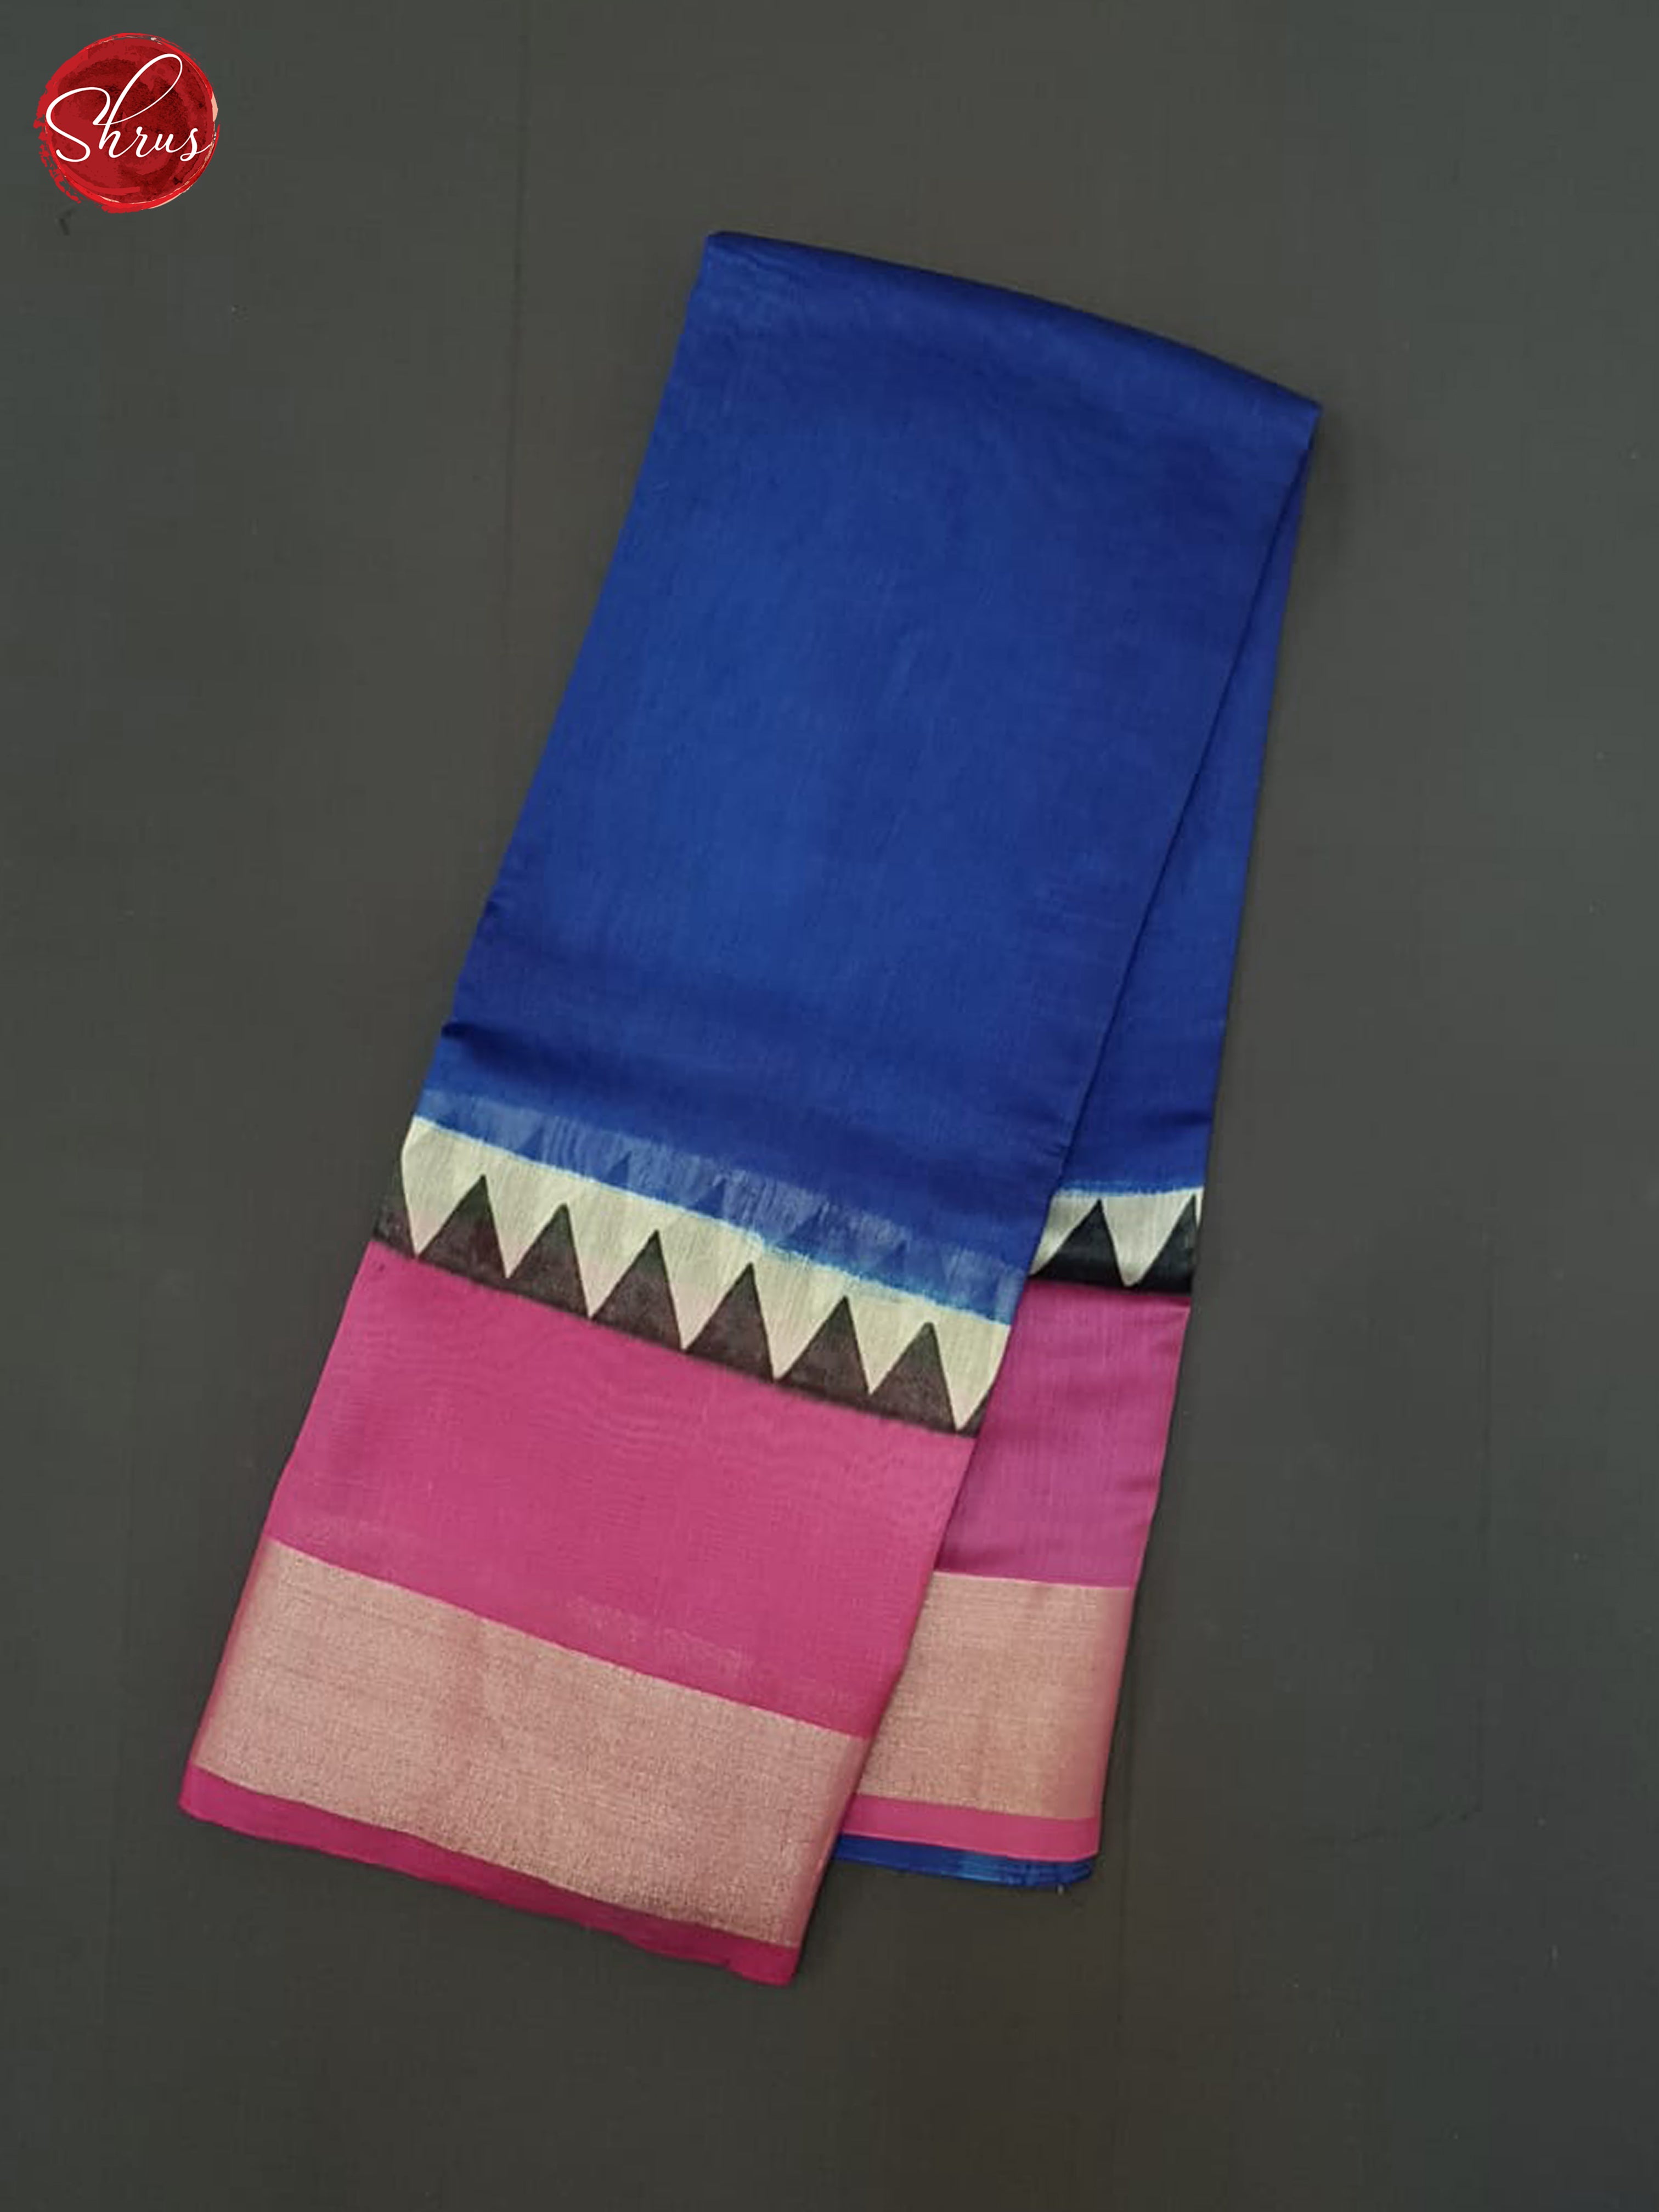 Blue And Pink - Shop on ShrusEternity.com